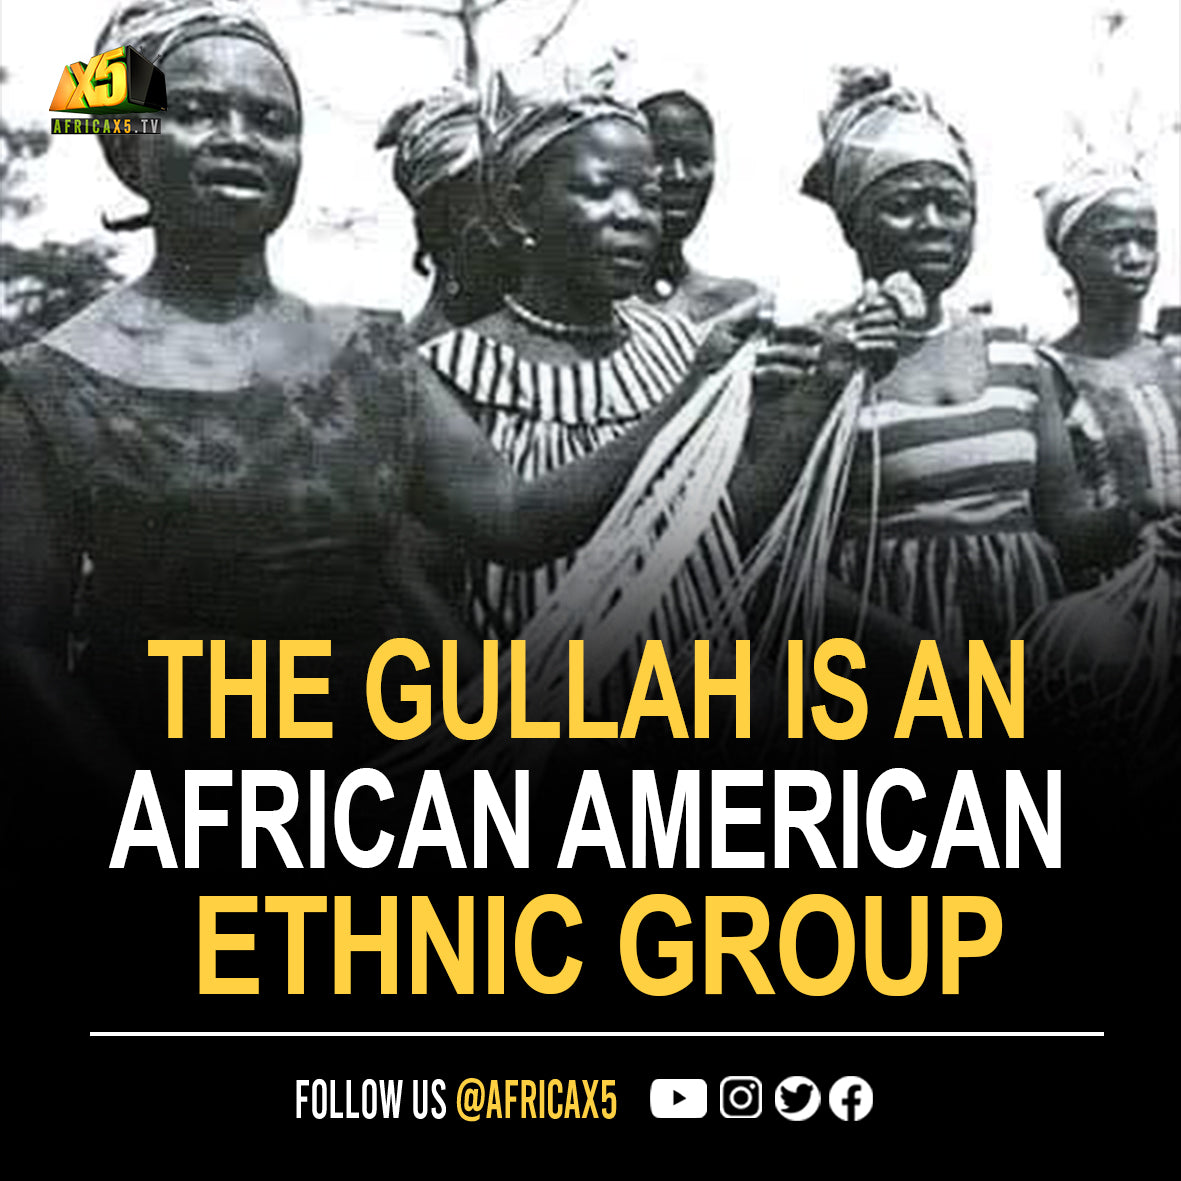 The Gullah are an African American ethnic group who predominantly live in the Lowcountry region of the U.S. states of Georgia, Florida, South Carolina, and North Carolina, within the coastal plain and the Sea Islands.